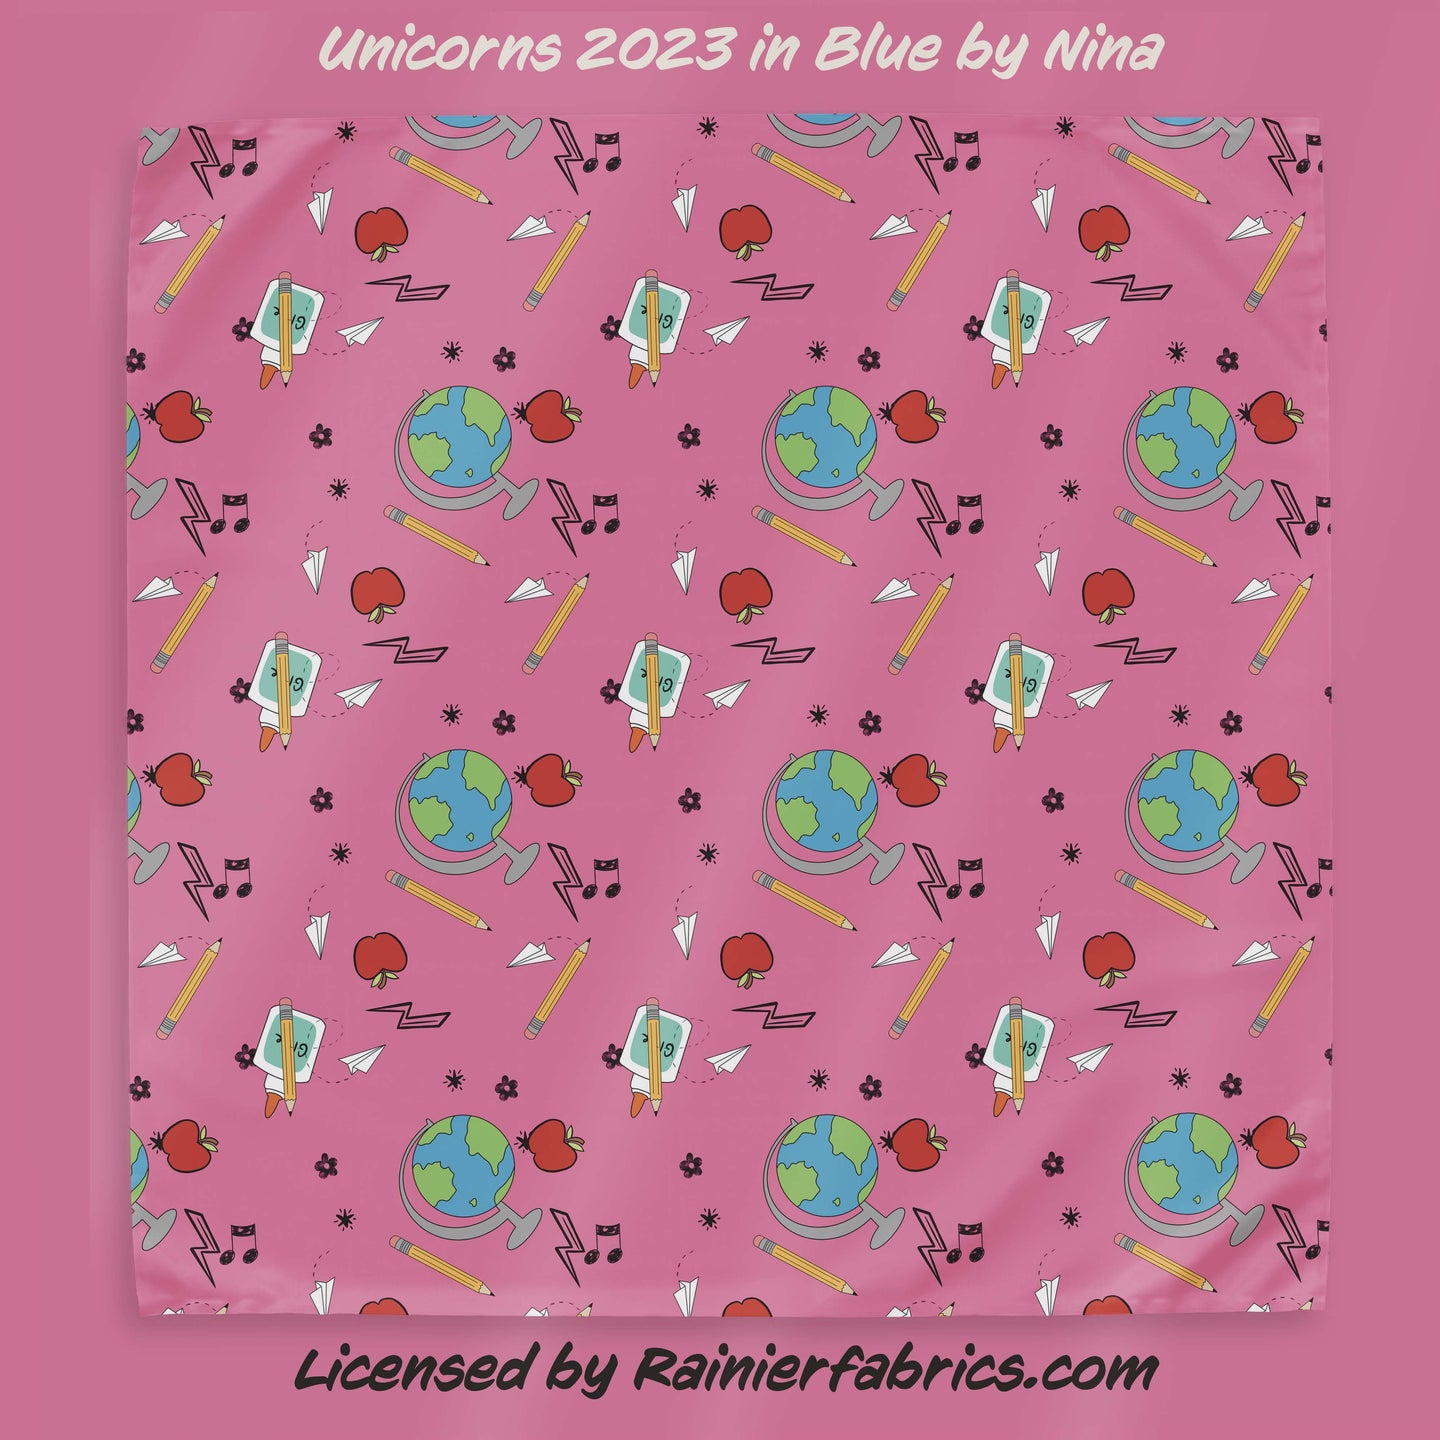 Back to School 2023 by Nina - 2-5 business days to ship - Order by 1/2 yard